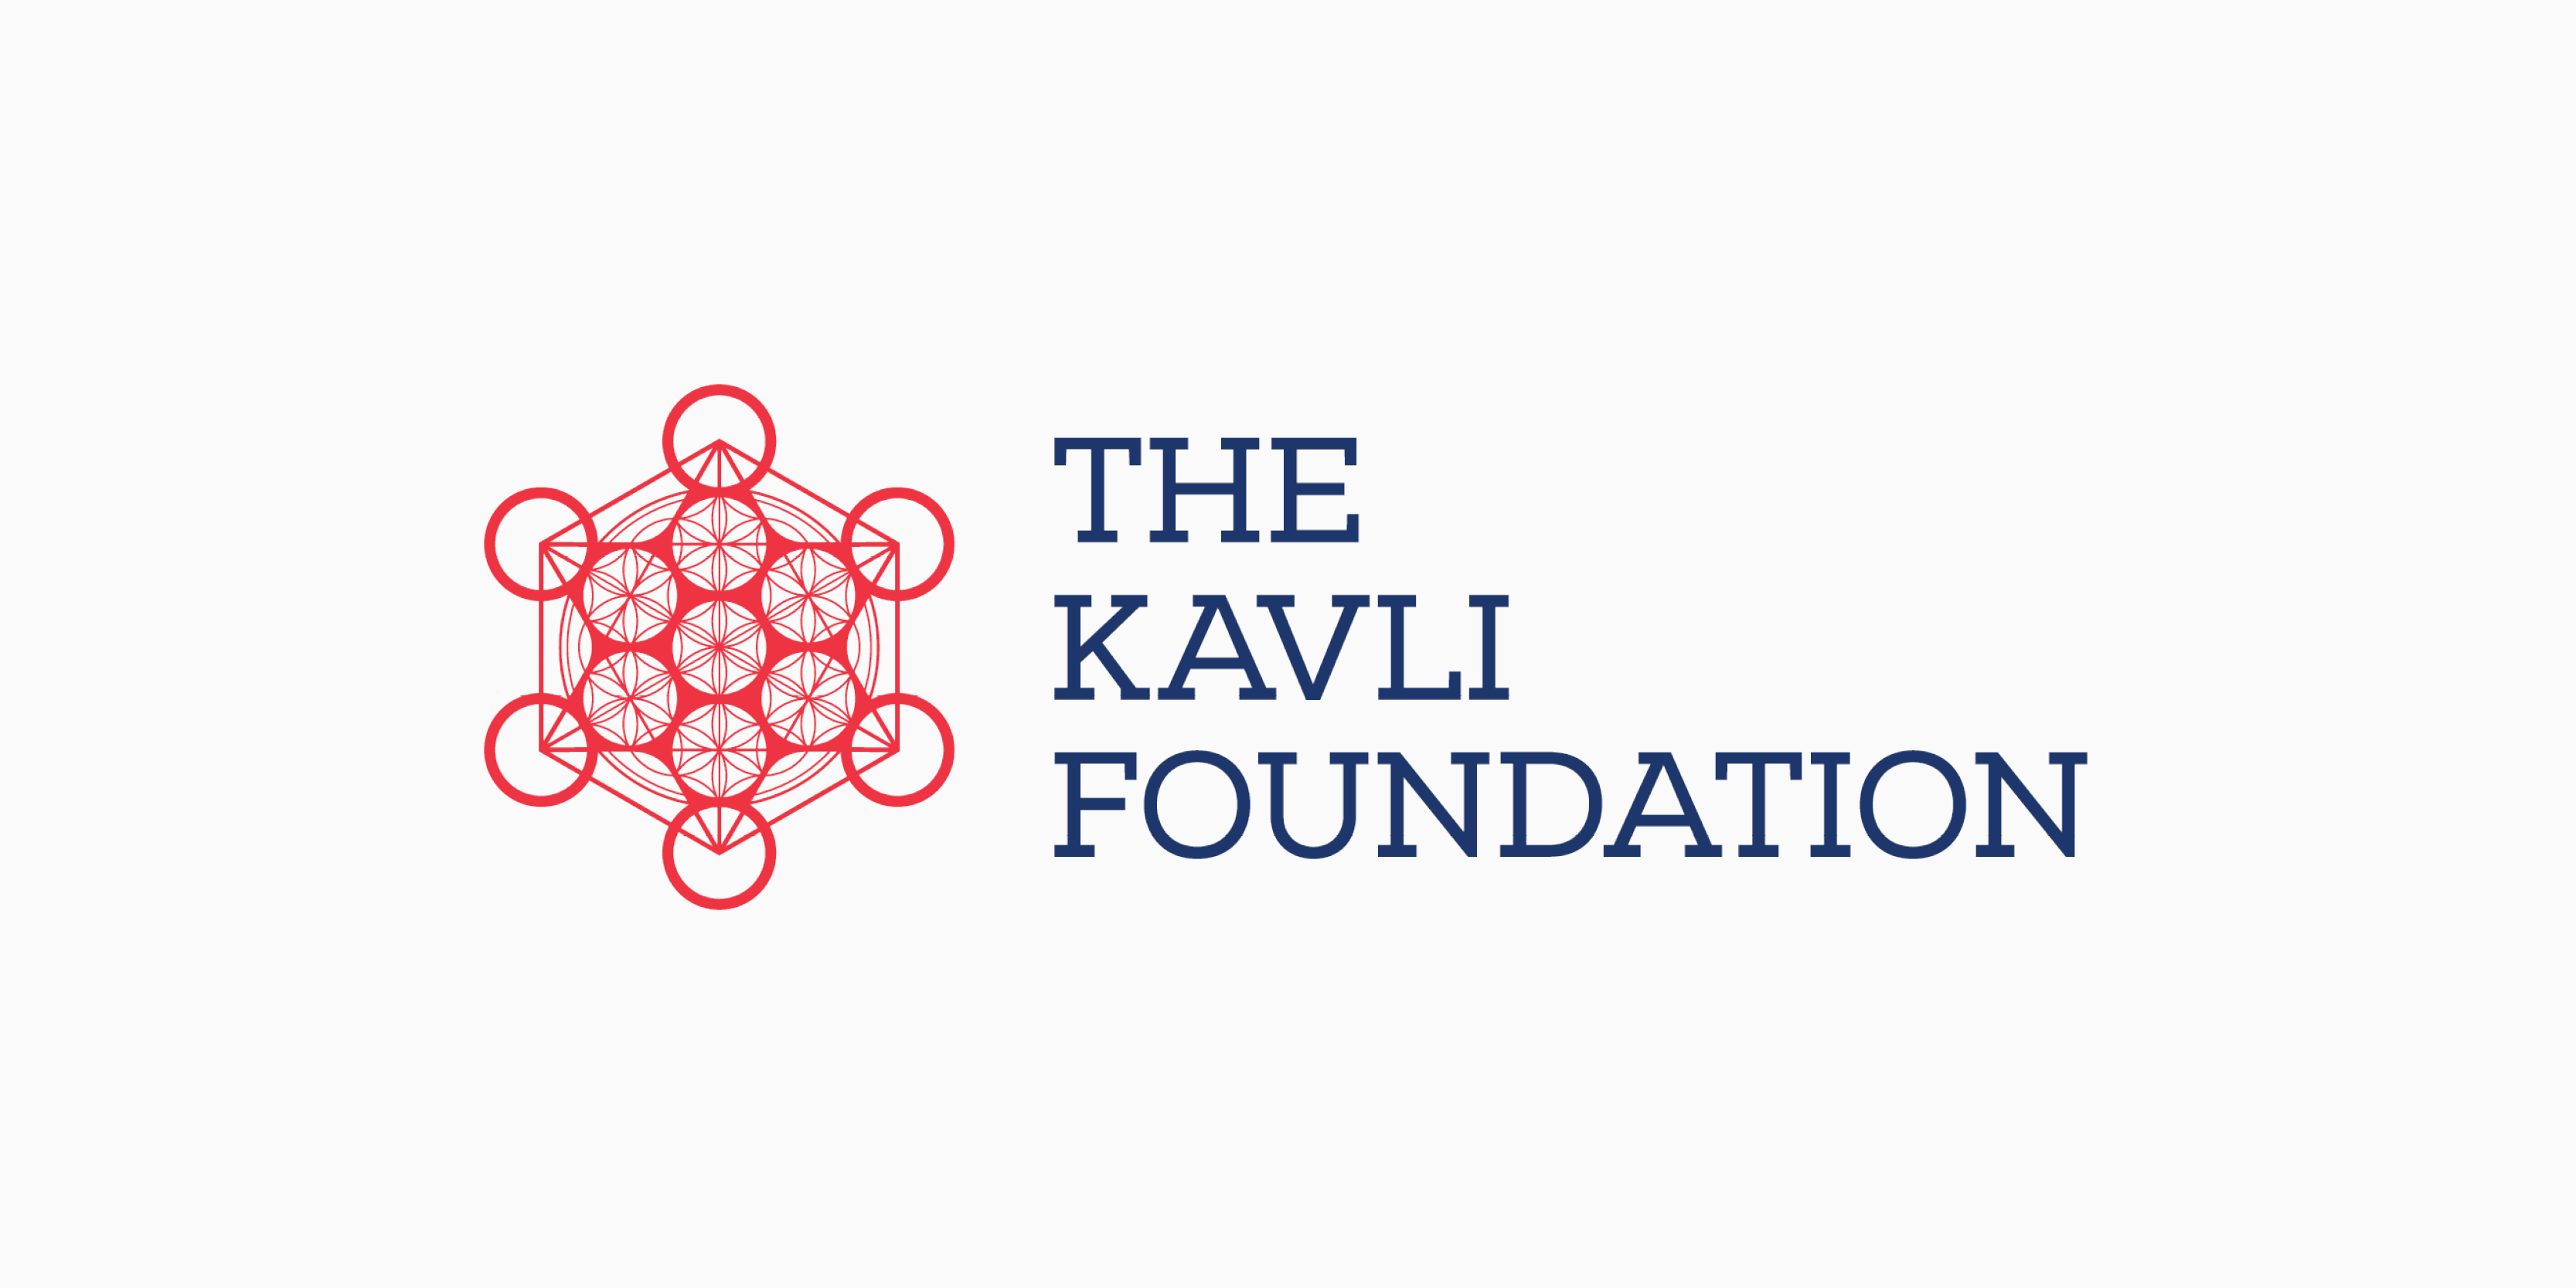 The Kavli Foundation has launched two new centers focusing on ethics, science, and the public

